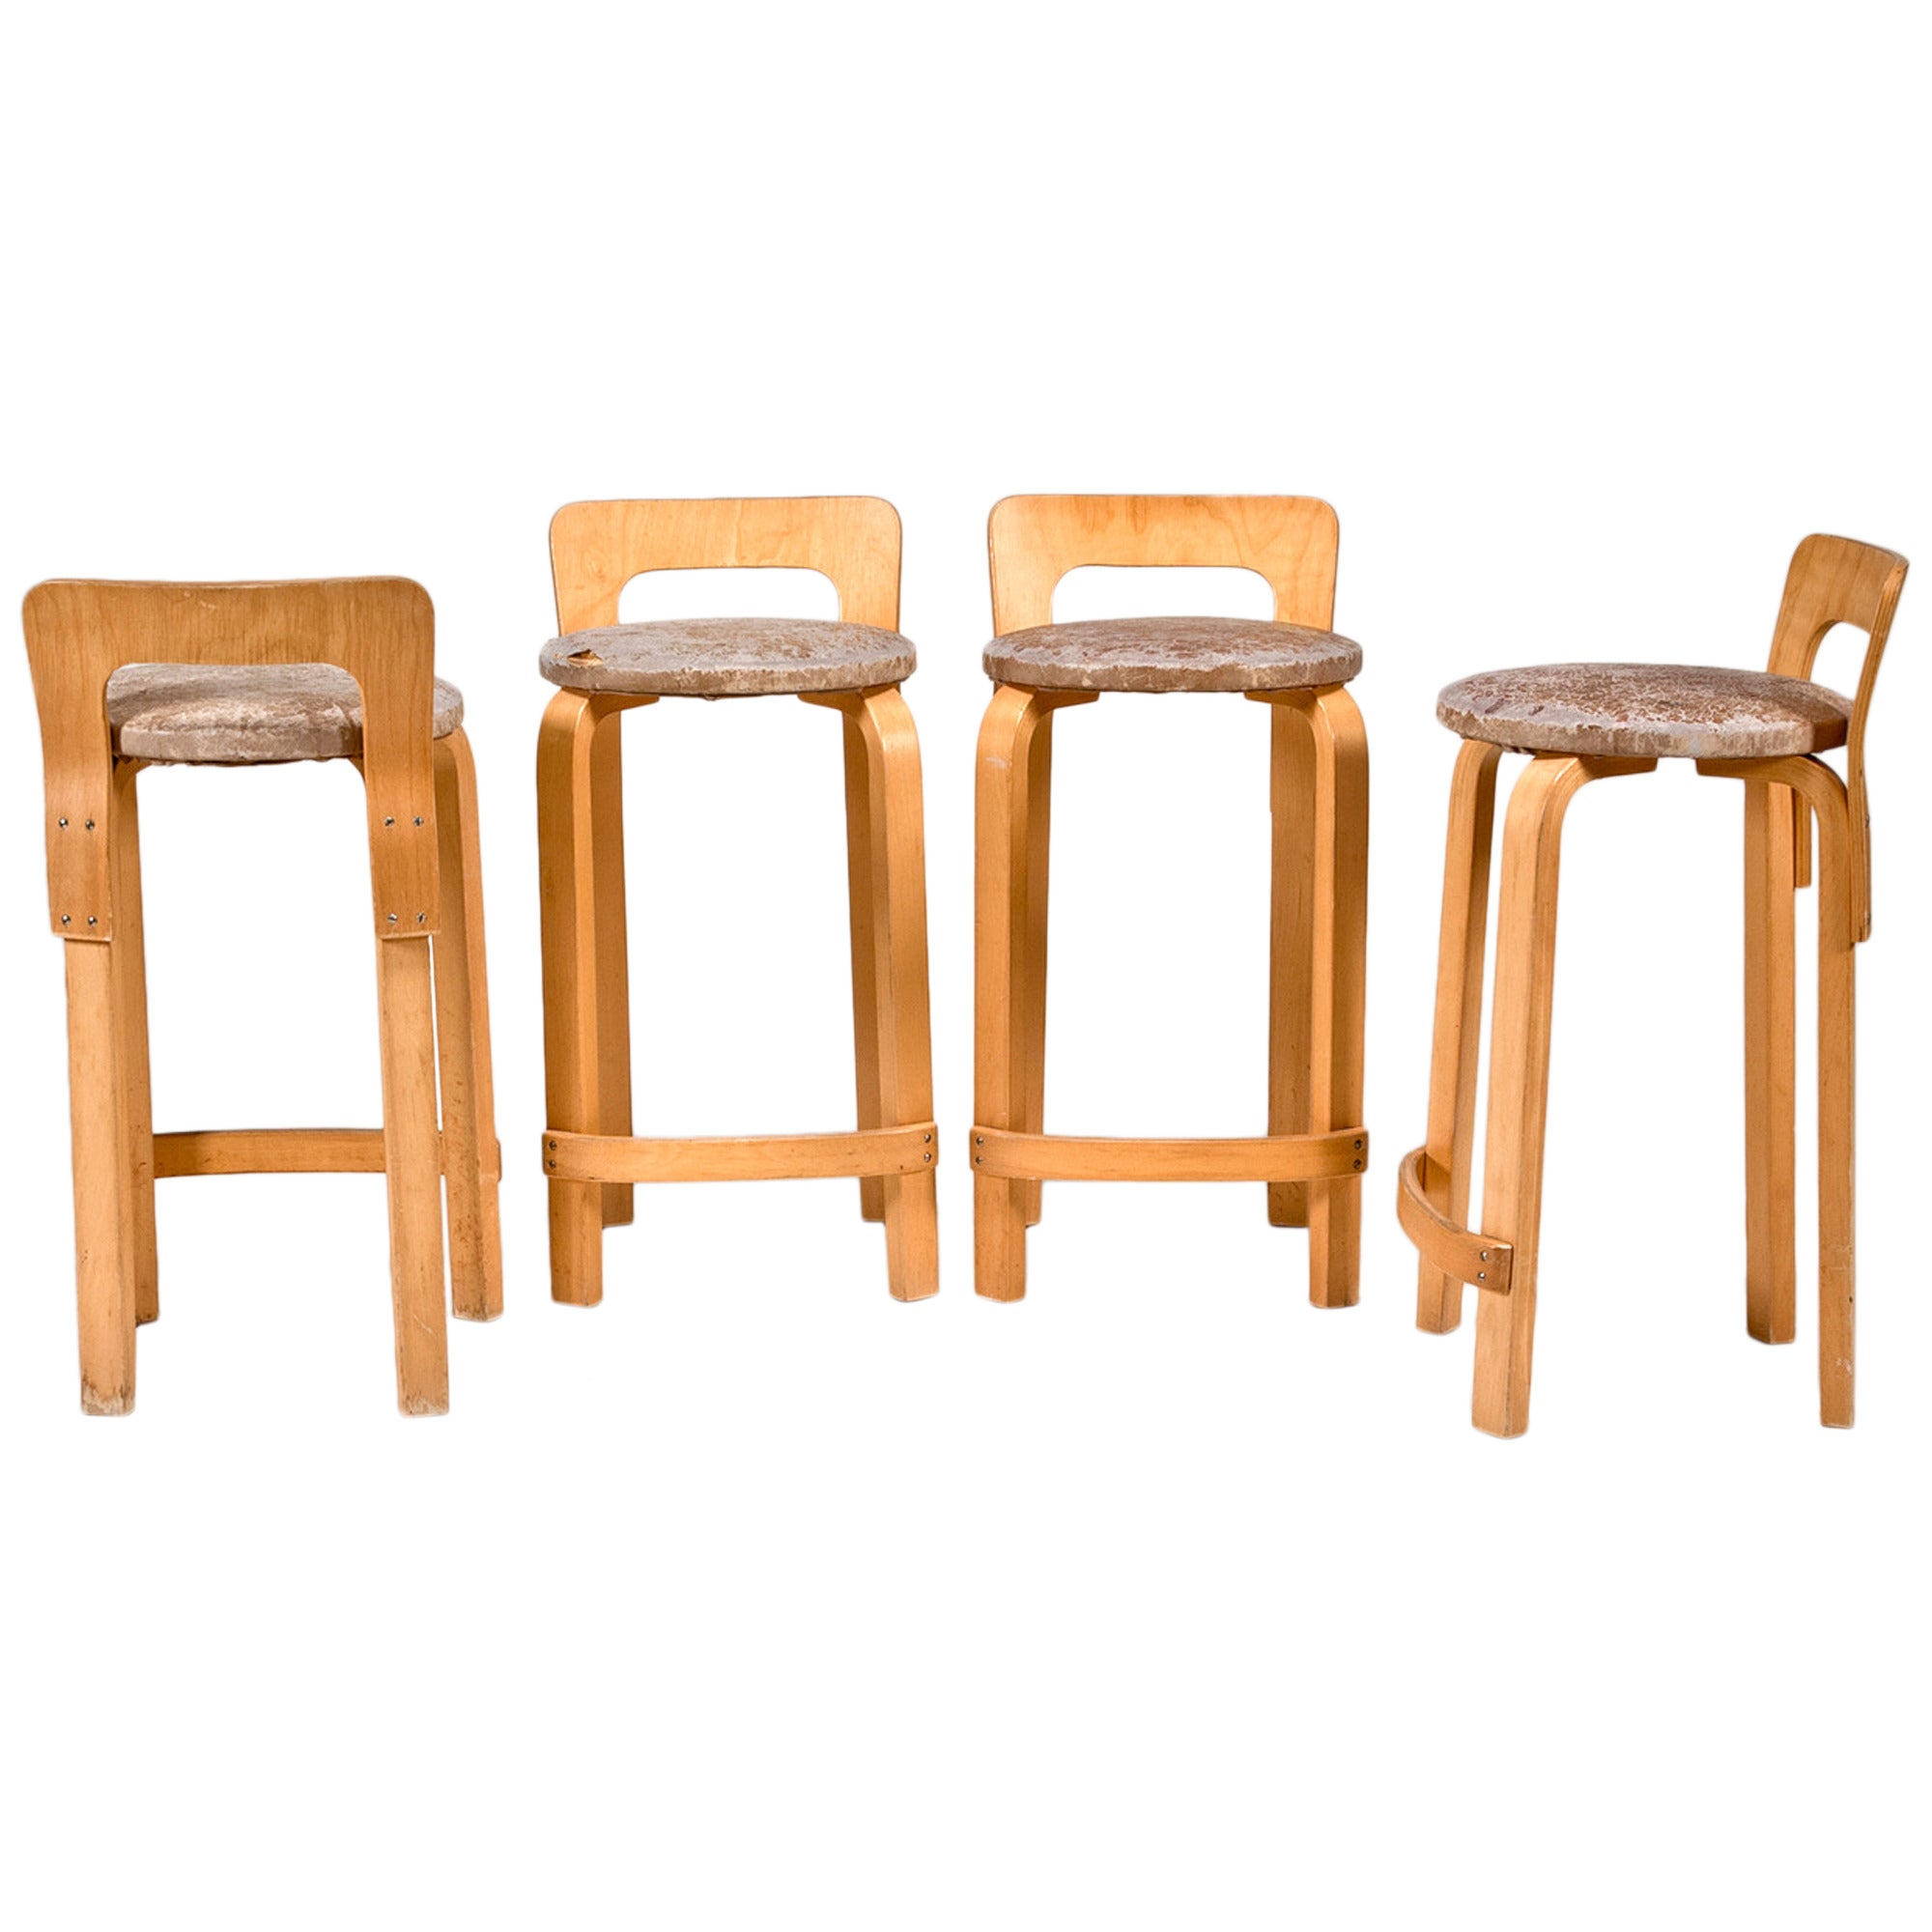 High Chair K65 'Set of 4' by Alvar Aalto from Artek 2nd Cycle